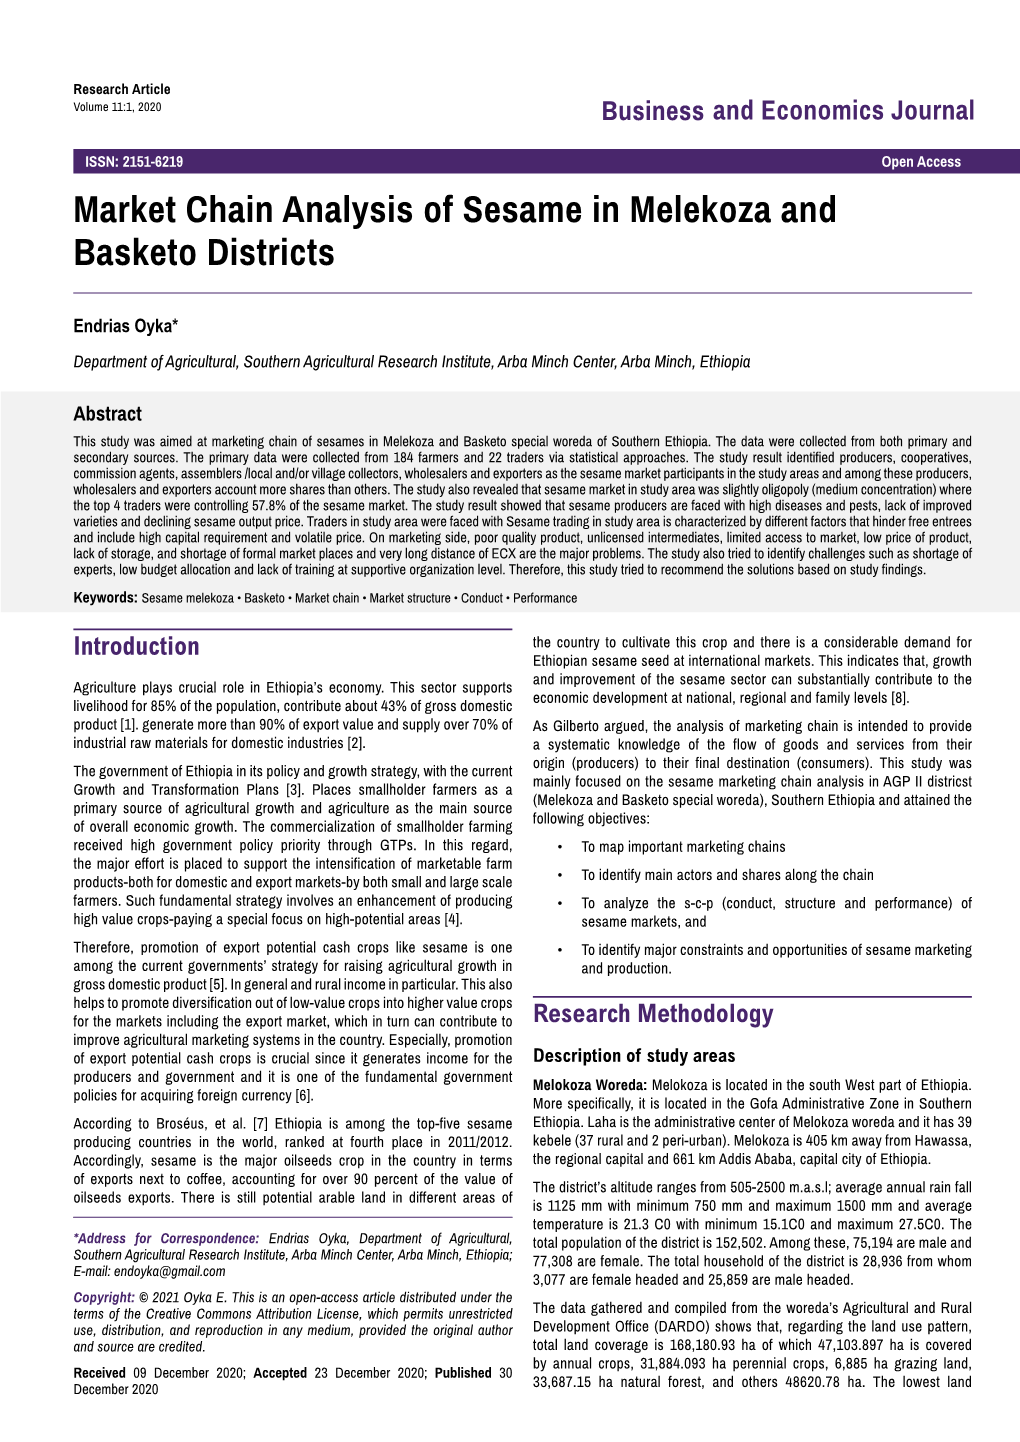 Market Chain Analysis of Sesame in Melekoza and Basketo Districts